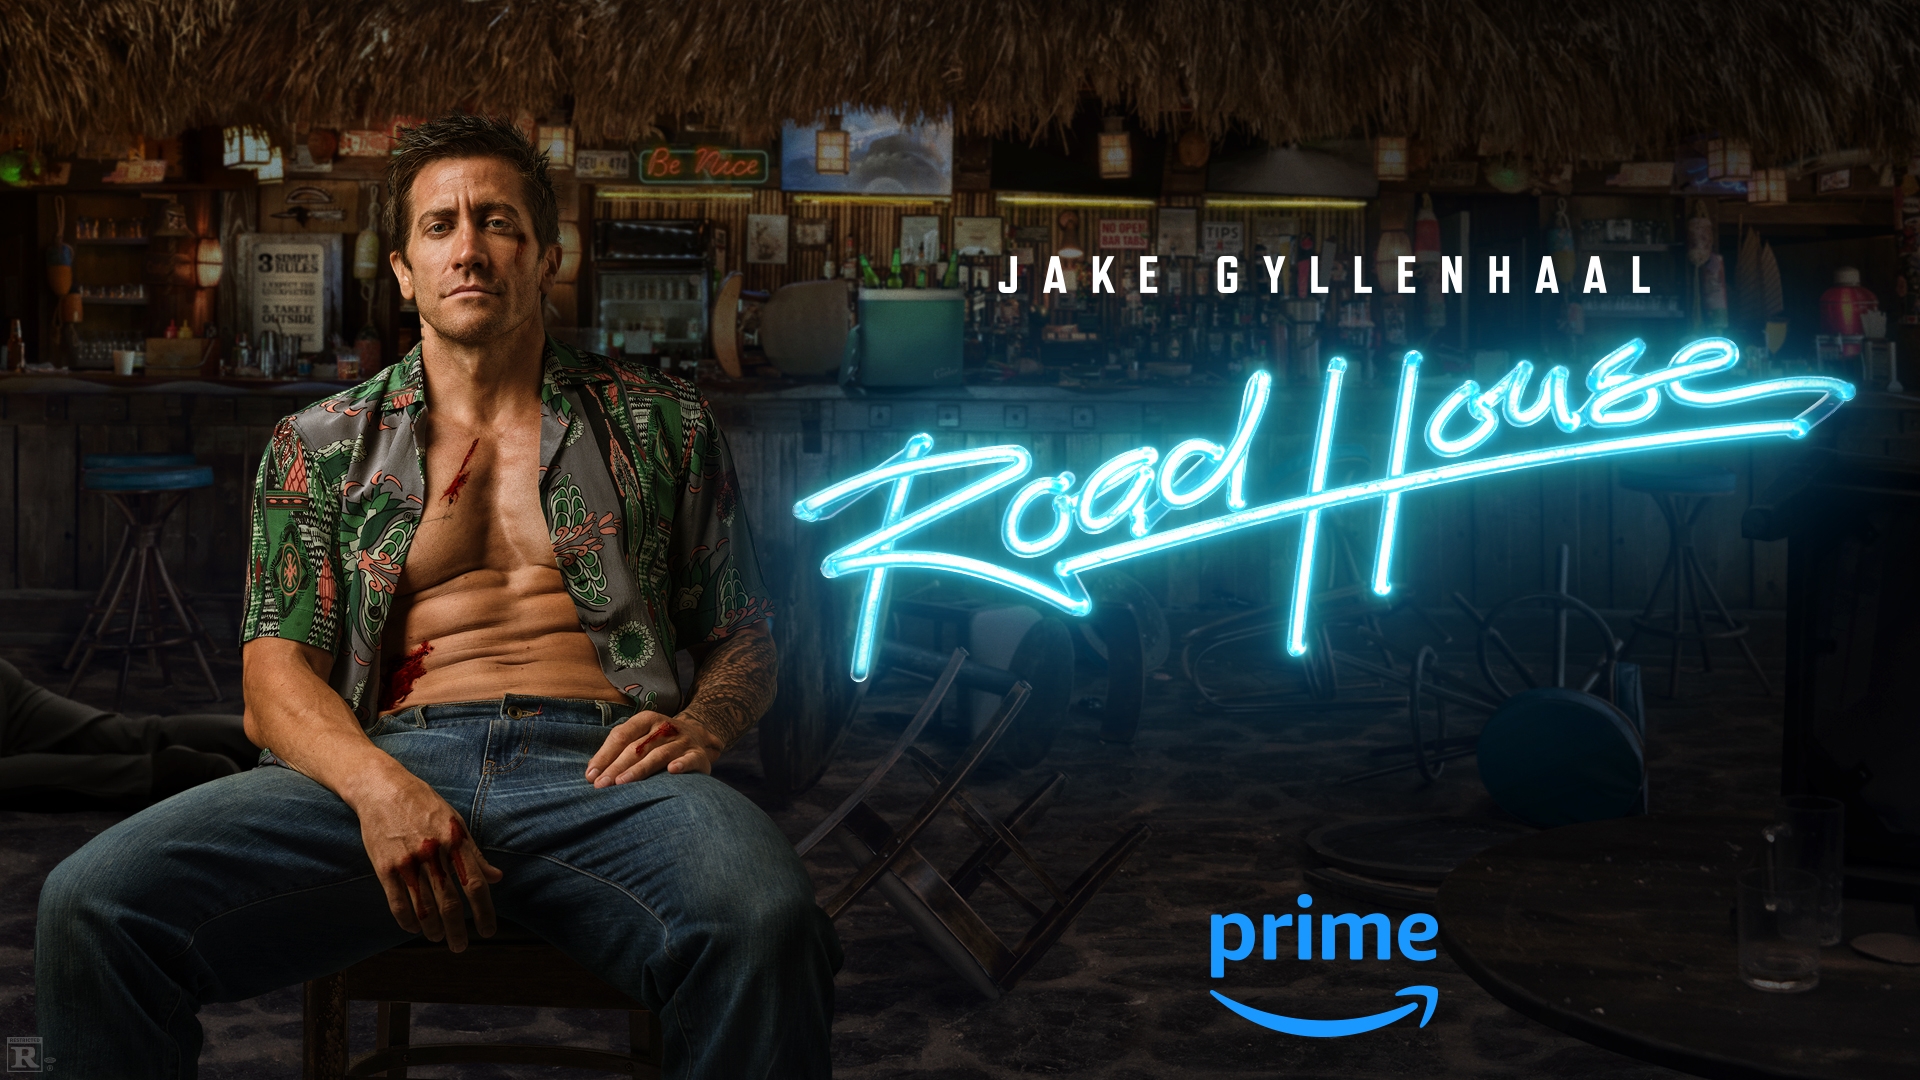 ROAD HOUSE, Starring Jake Gyllenhaal, Coming to Prime Video On March 21